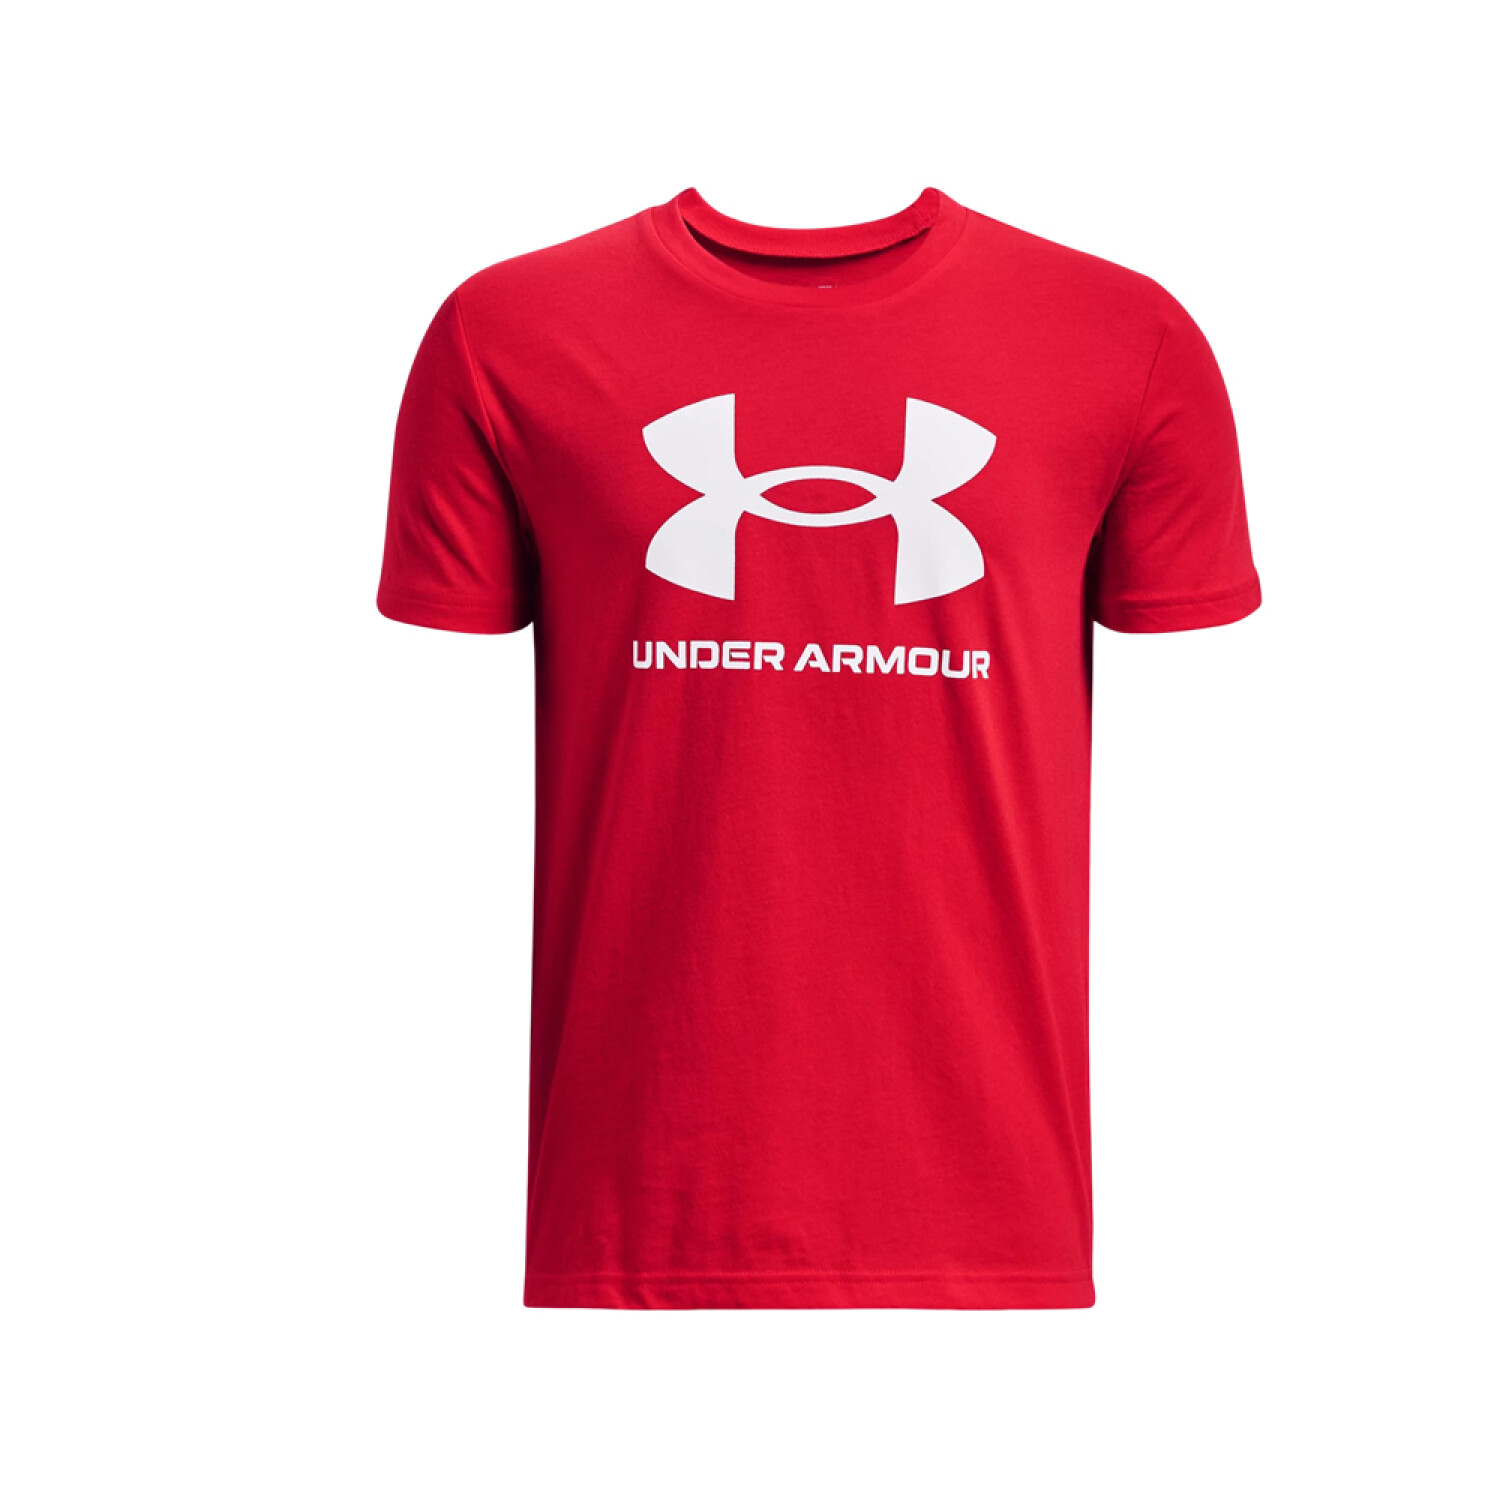 Remera Mujer Under Armour Logo - On Sports